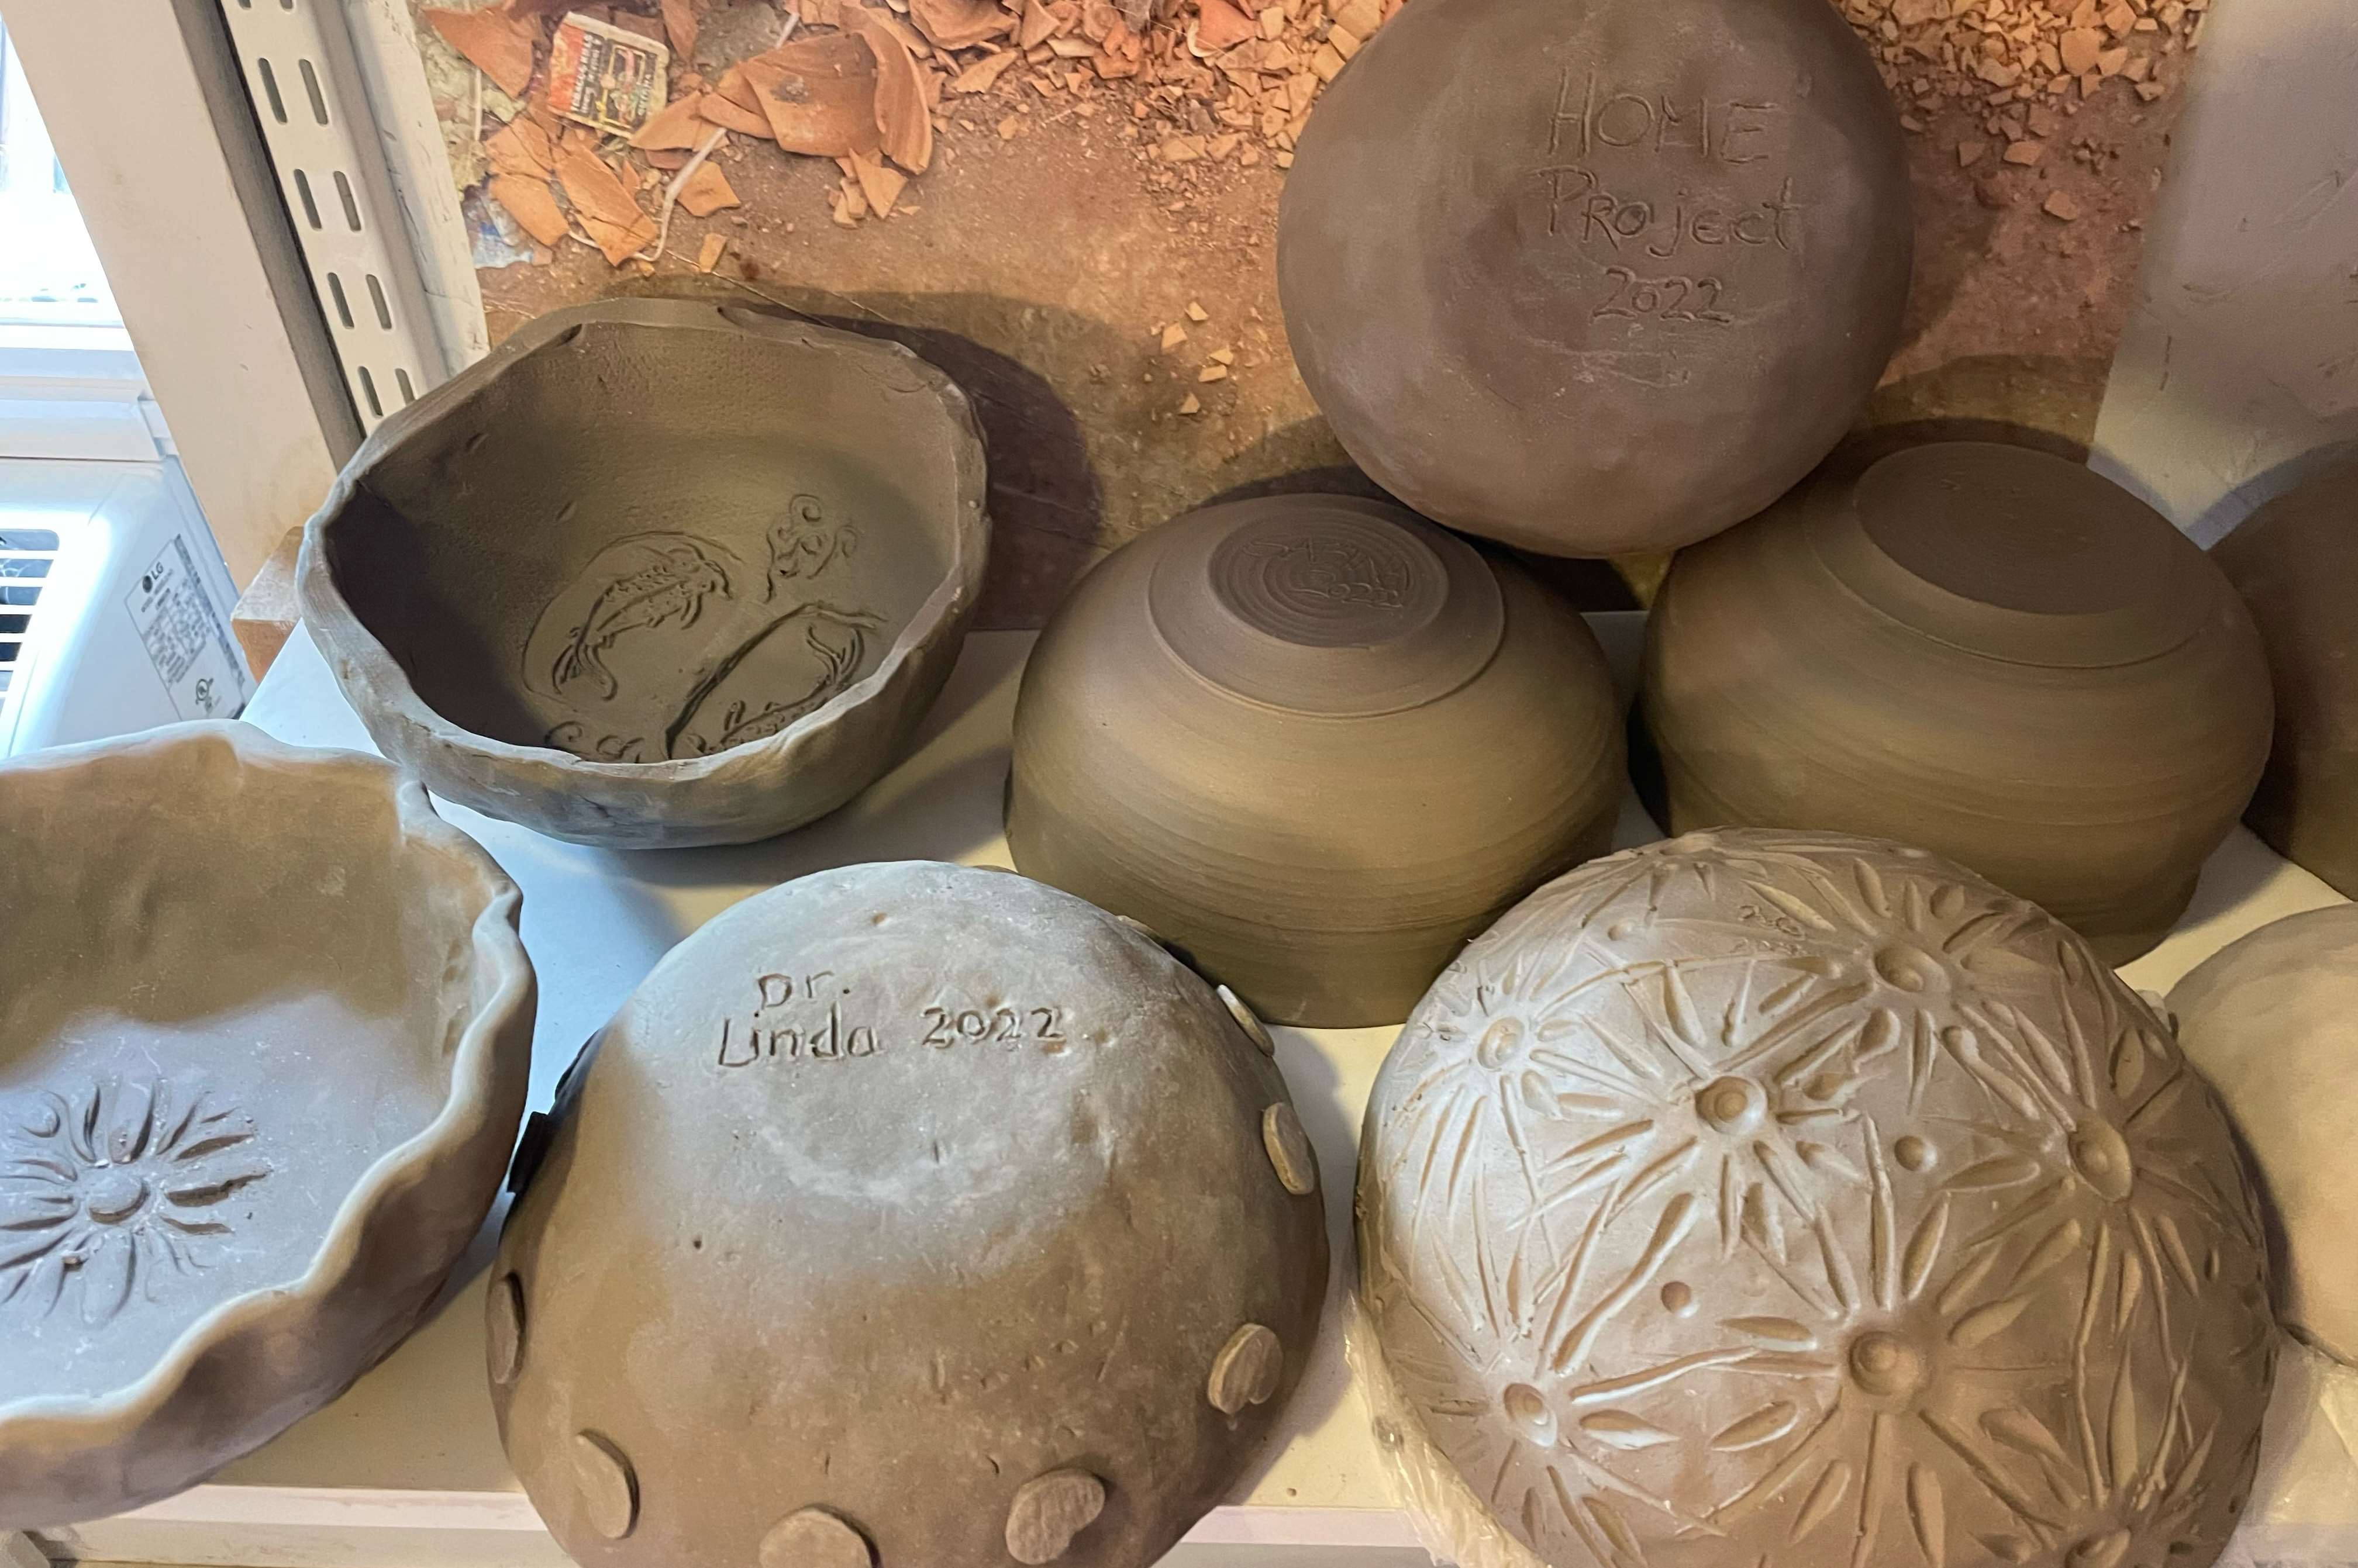 Bowls in progress for the Empty Bowls 2022 event